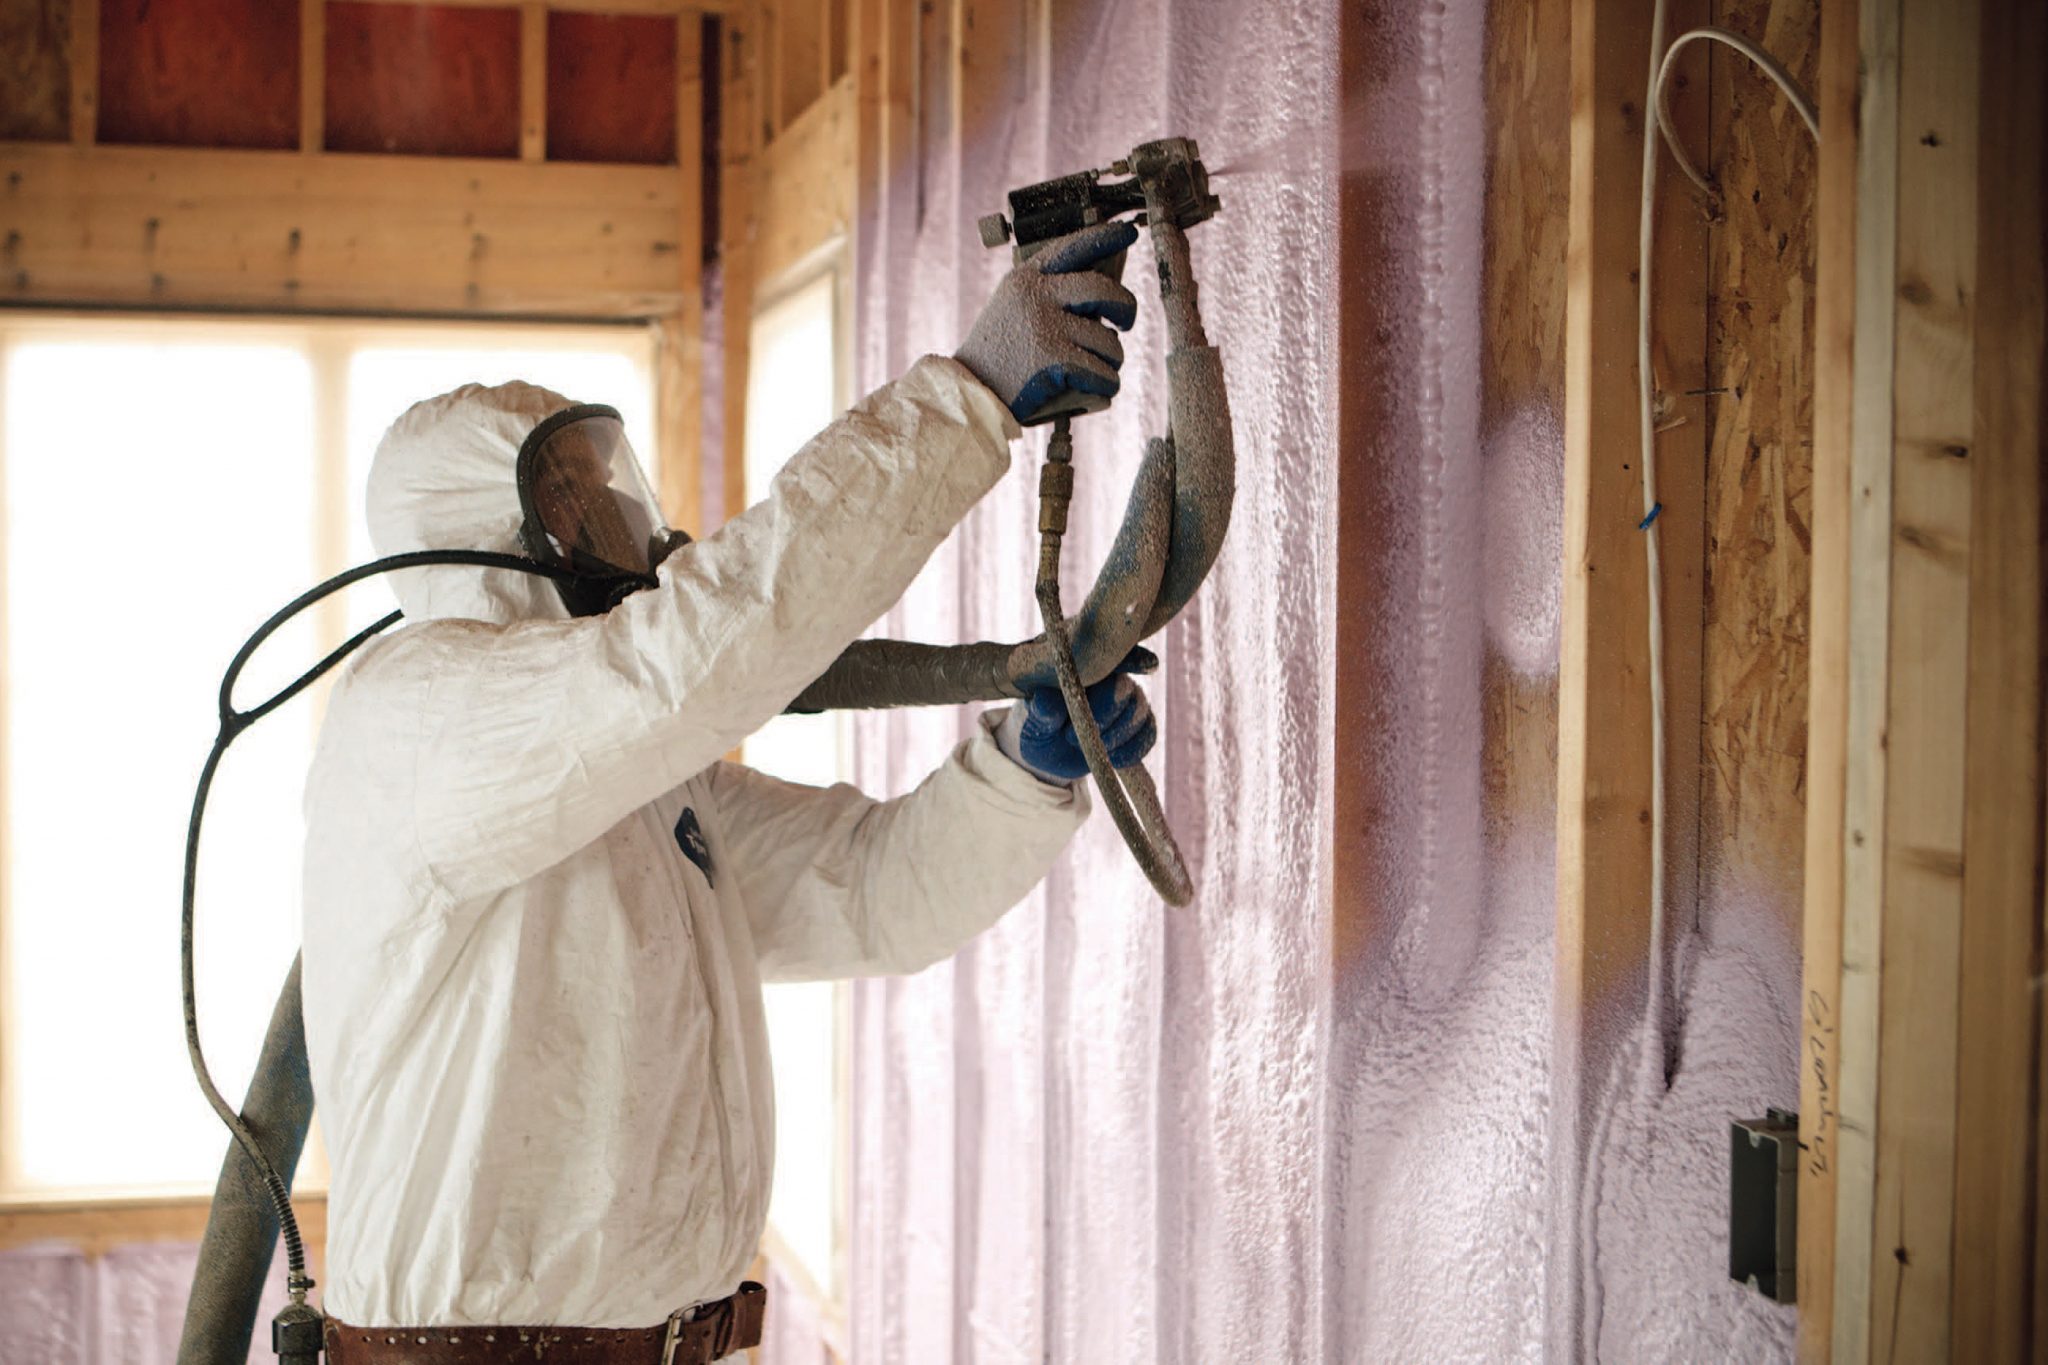 Professionally installed spray foam insulation by Ottawa contractor Conger Insulation